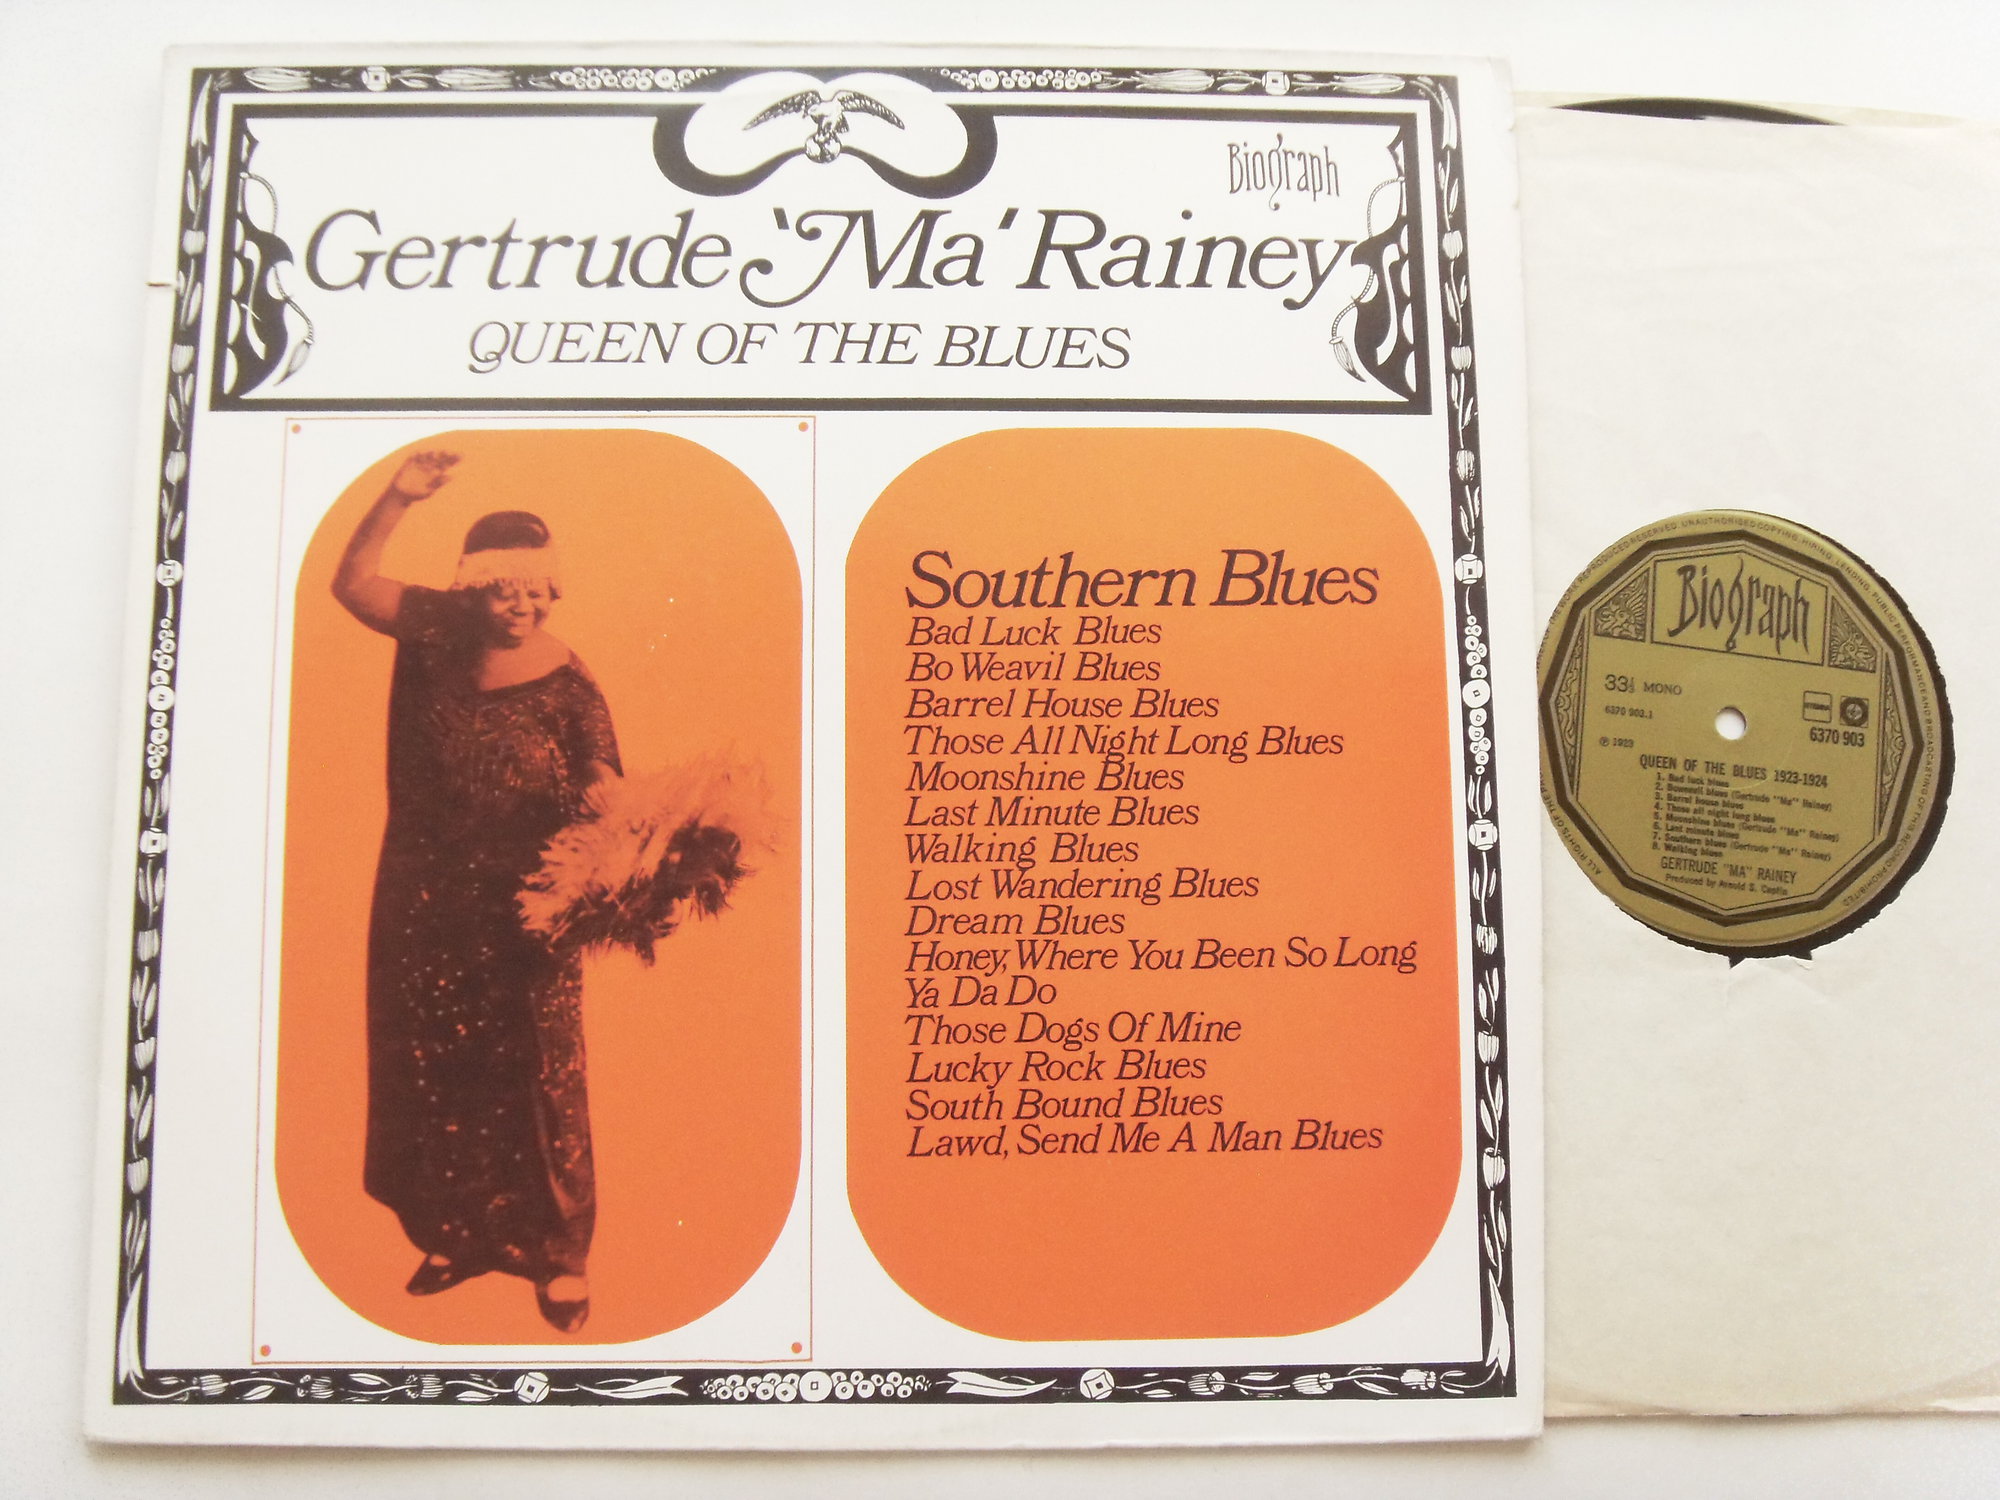 Gertrude 'Ma' RAINEY Queen of the blues